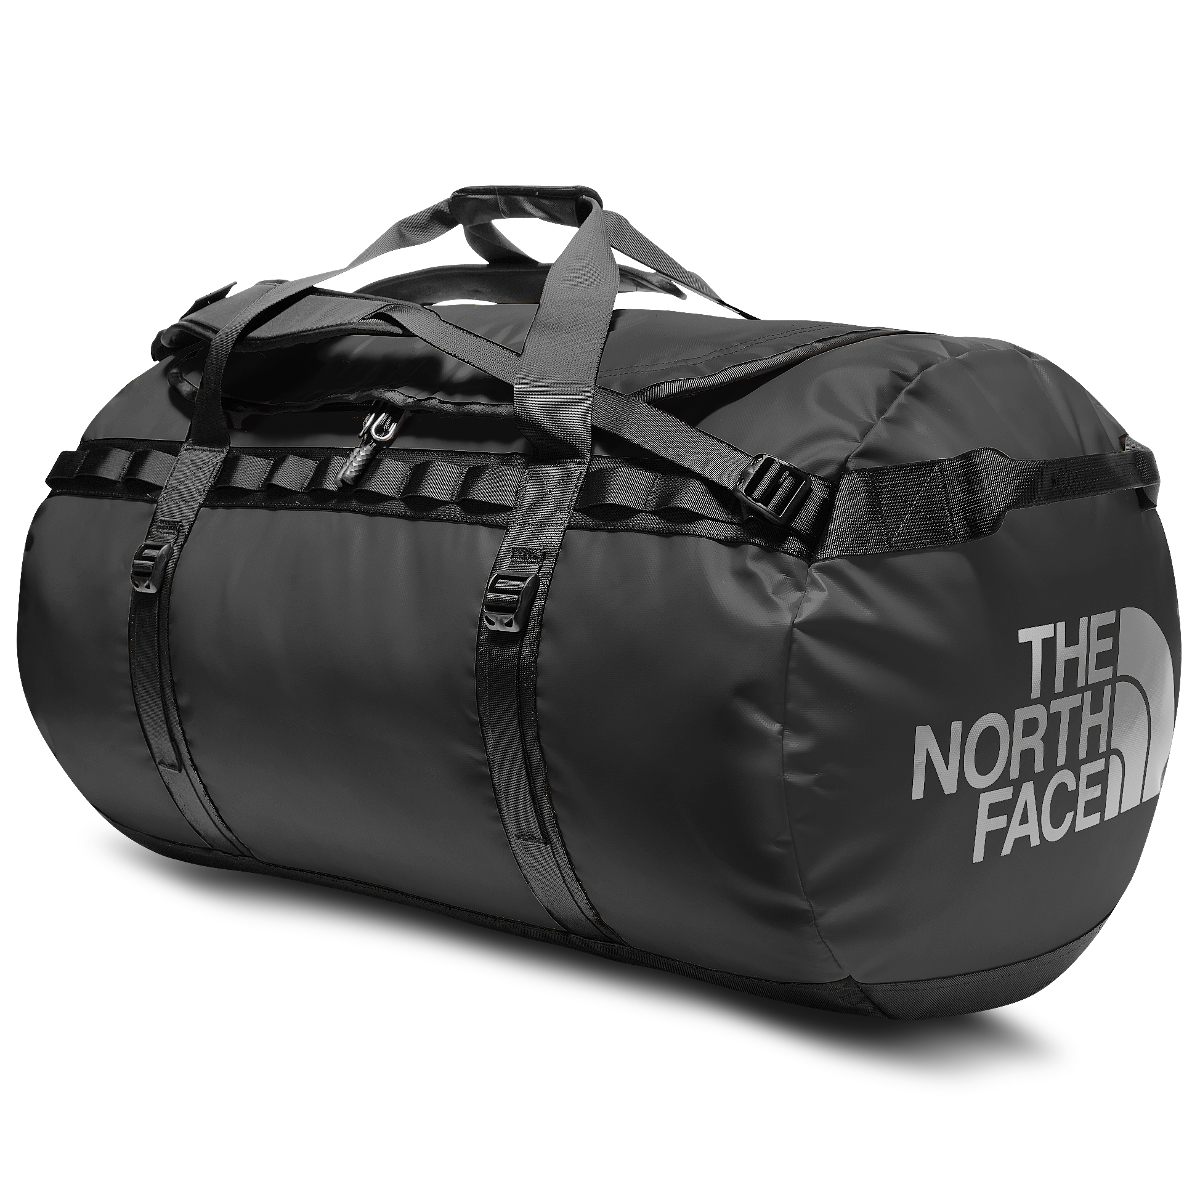 The North Face The North Face Base Camp Duffel Bag Xl From Eastern Mountain Sports Sportspyder